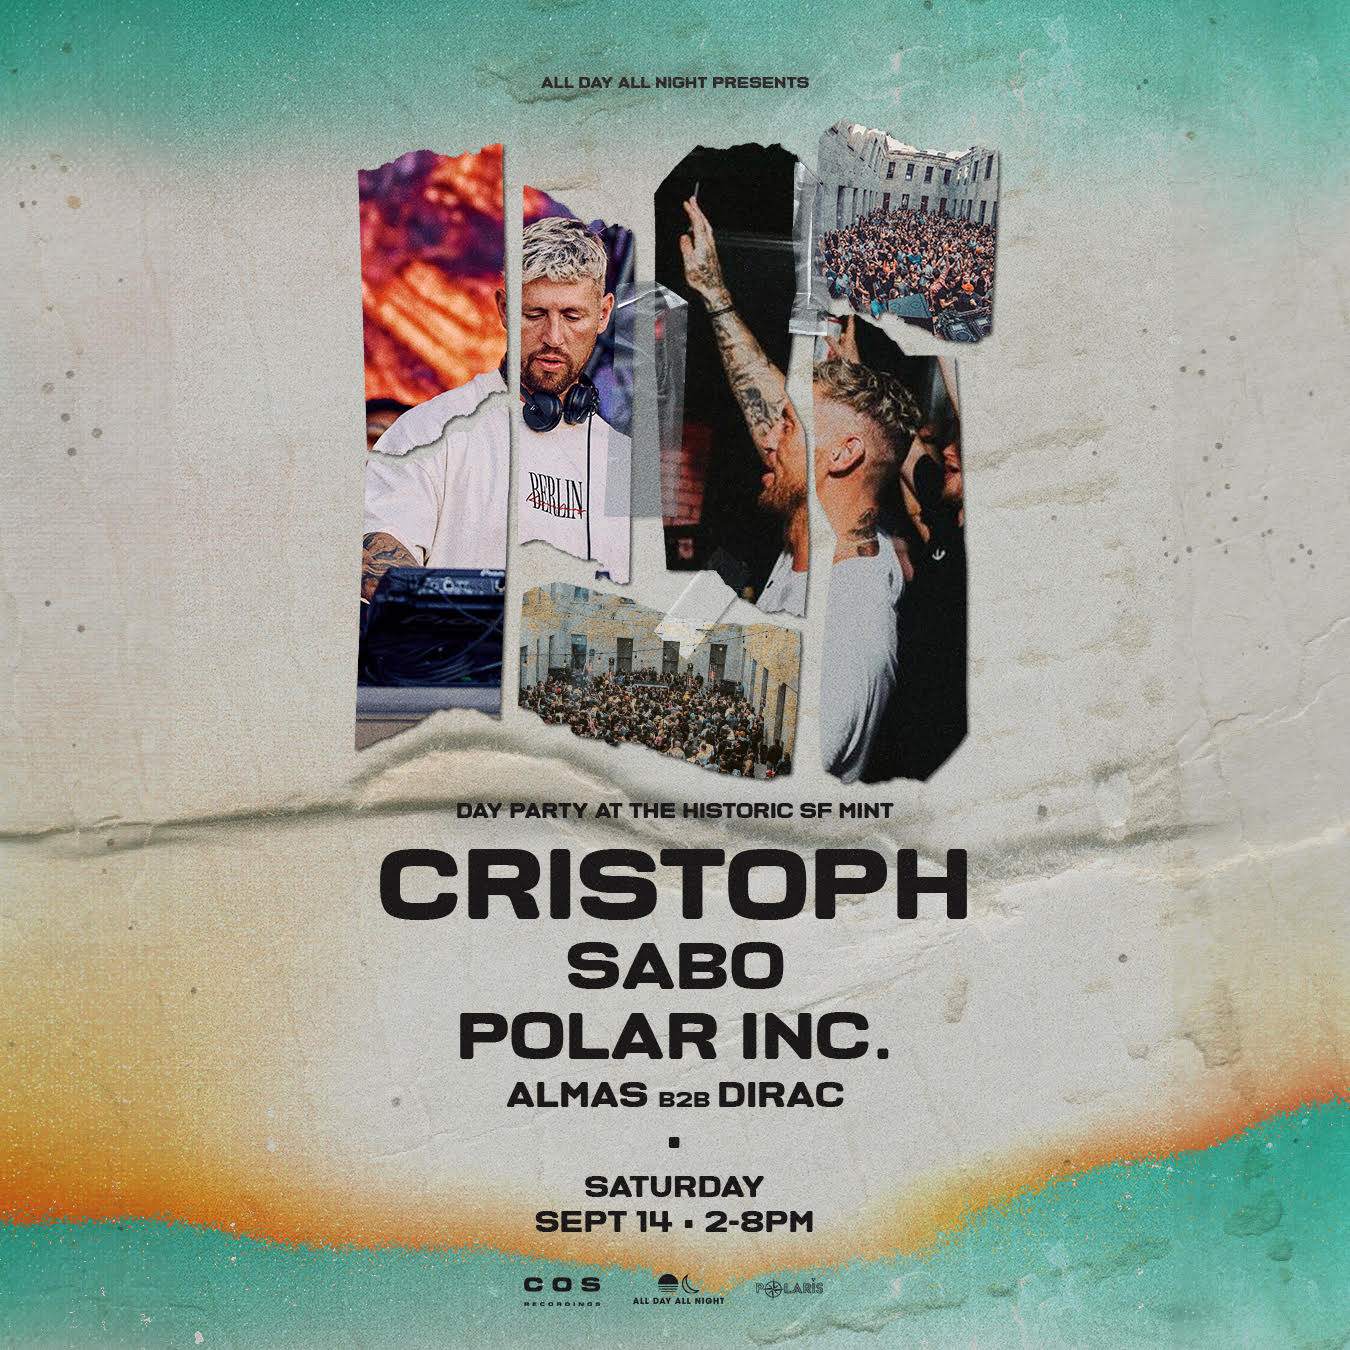 Day Party with Cristoph + Sabo + Polar Inc. at SF Mint - フライヤー表